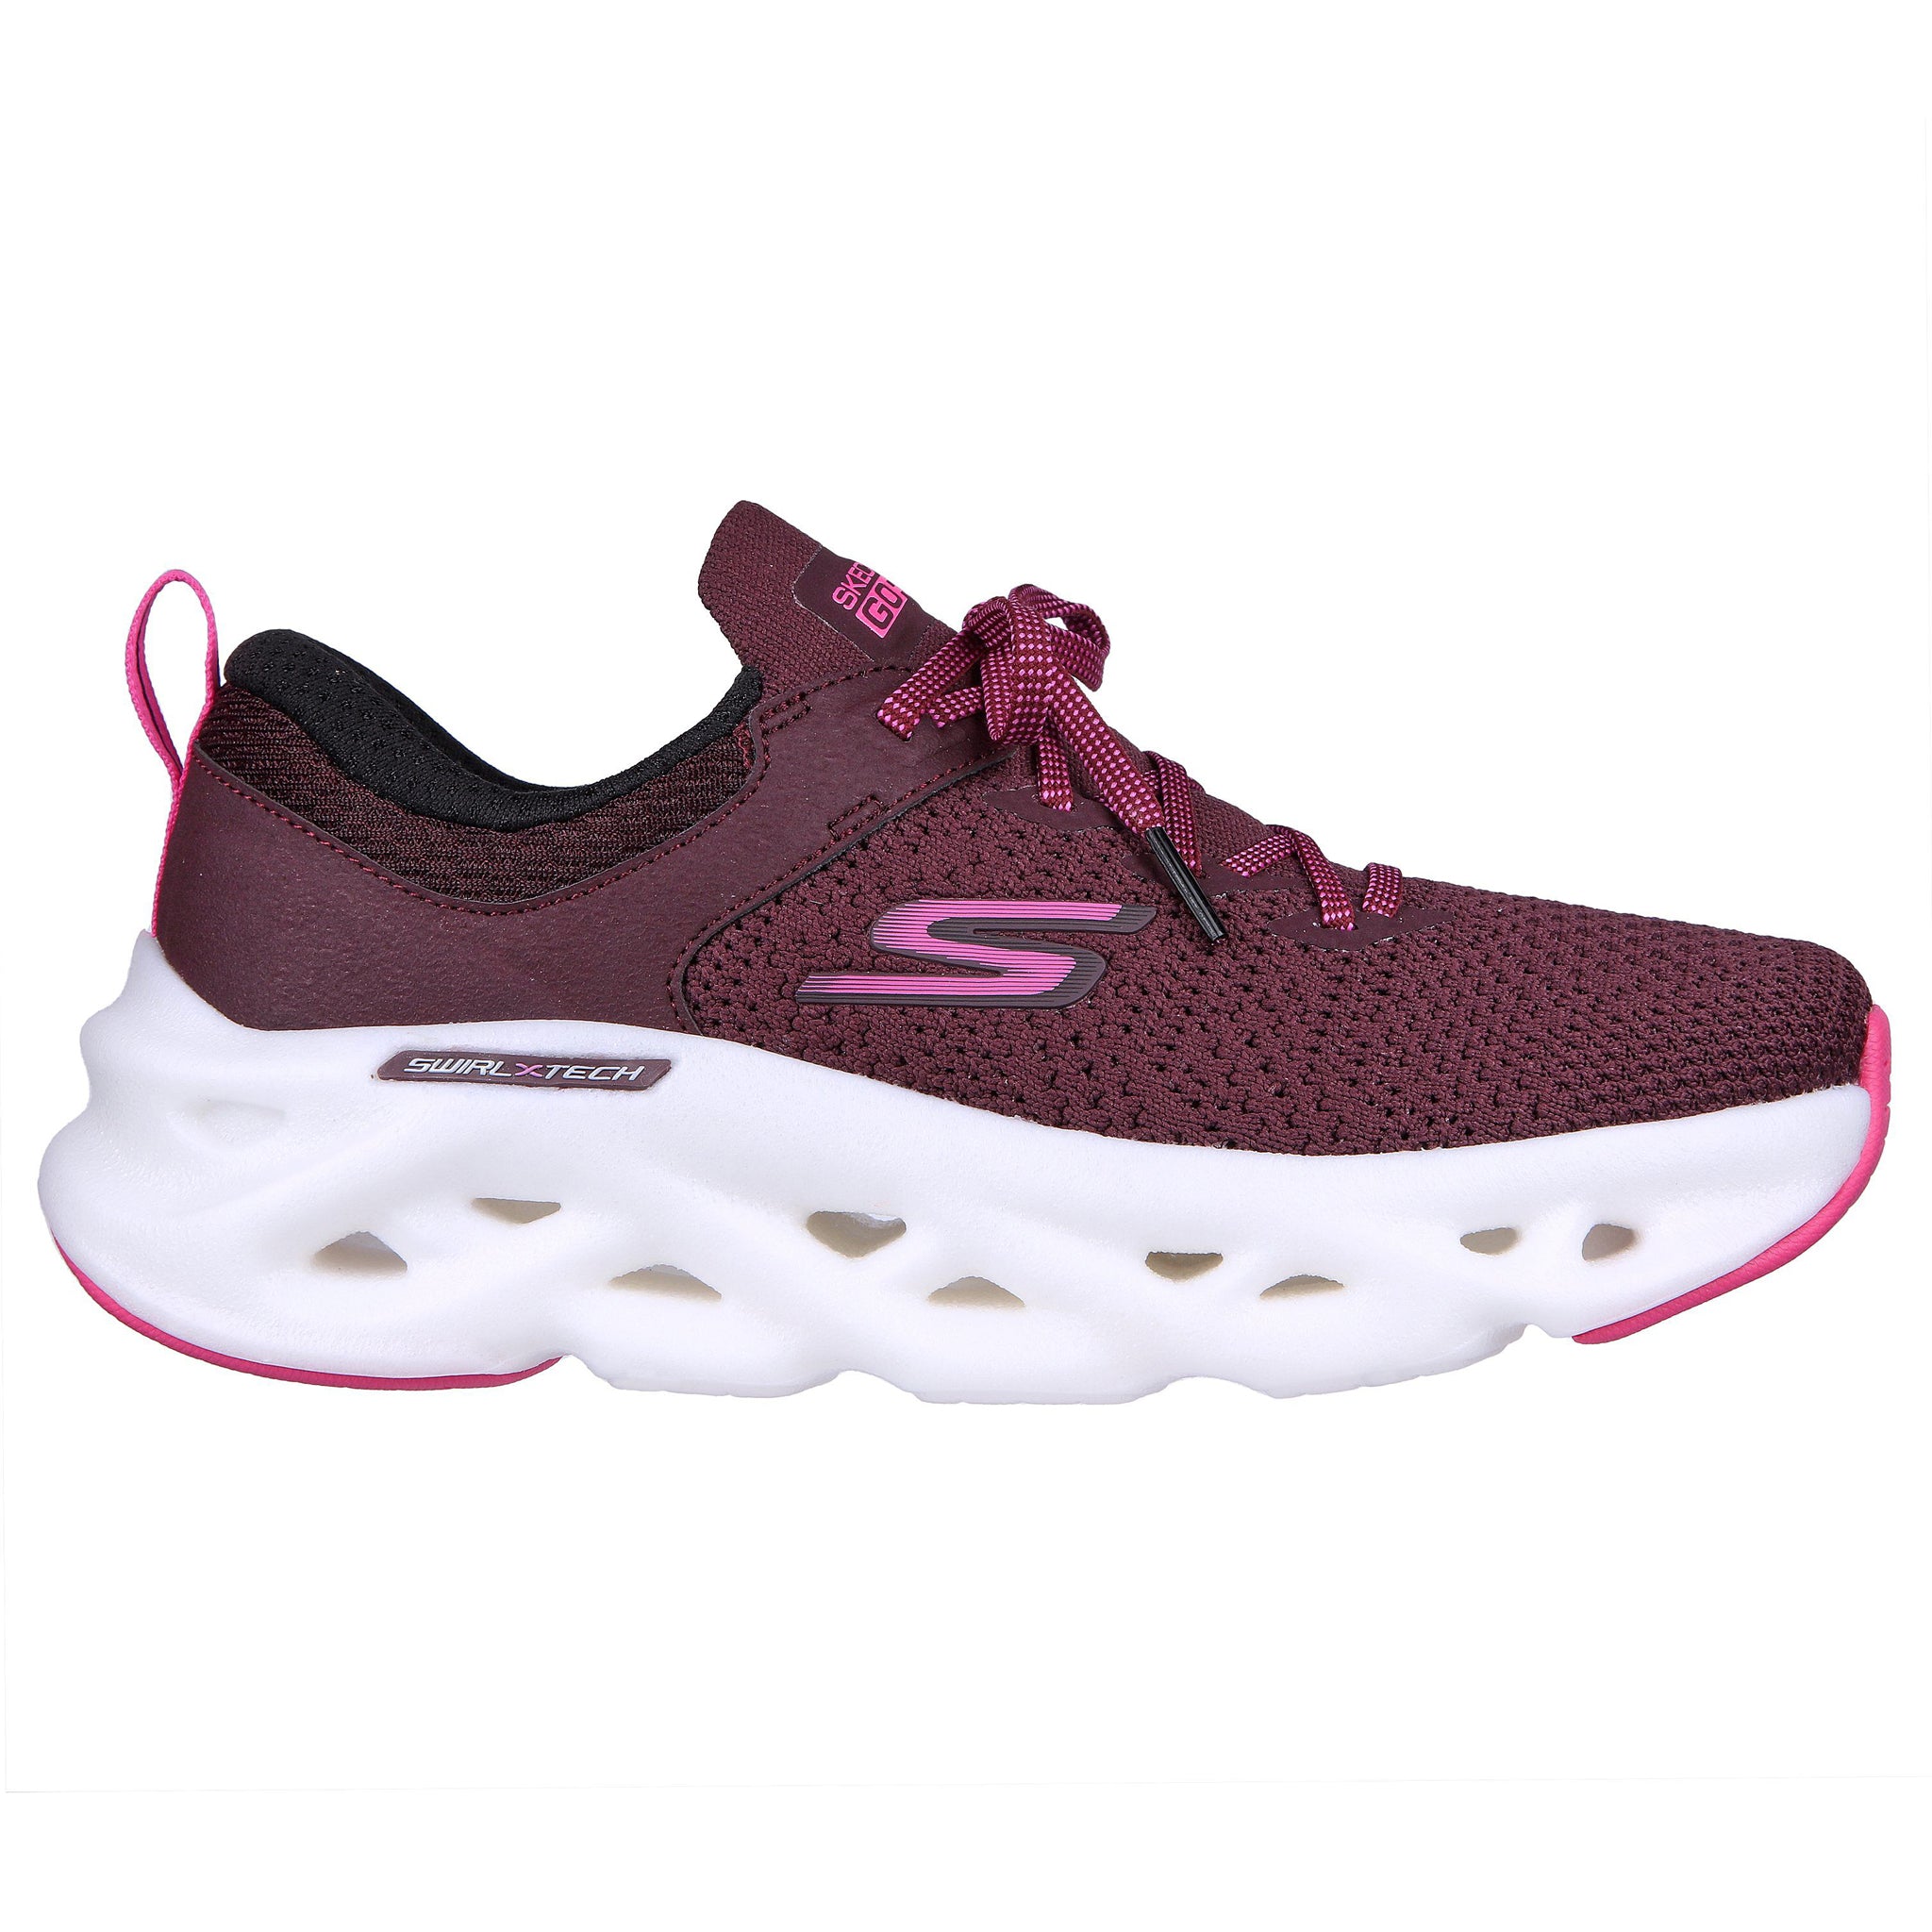 Skechers Women's 128793 GOrun Swirl Tech Charge Burgundy Athletic – That Shoe Store and More